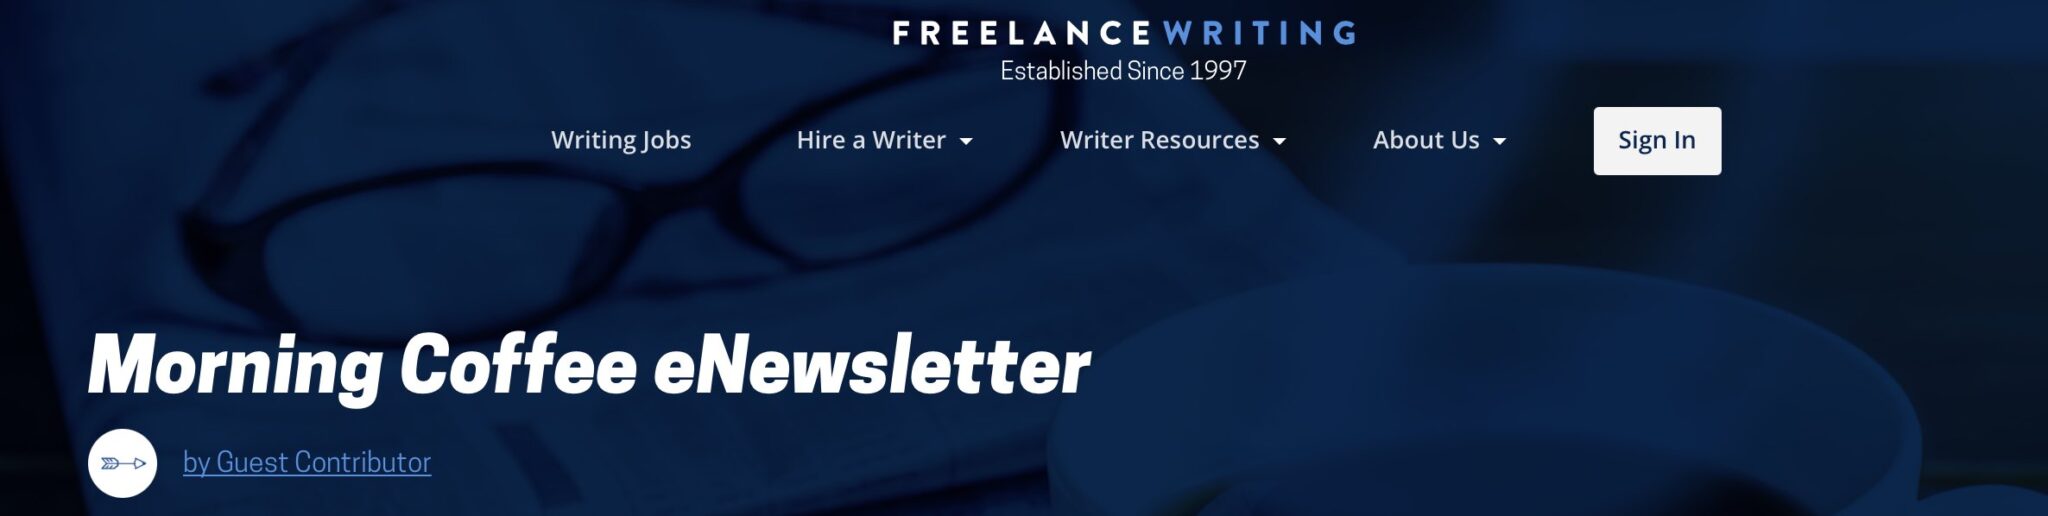 morning coffee newsletter homepage for freelance writing jobs